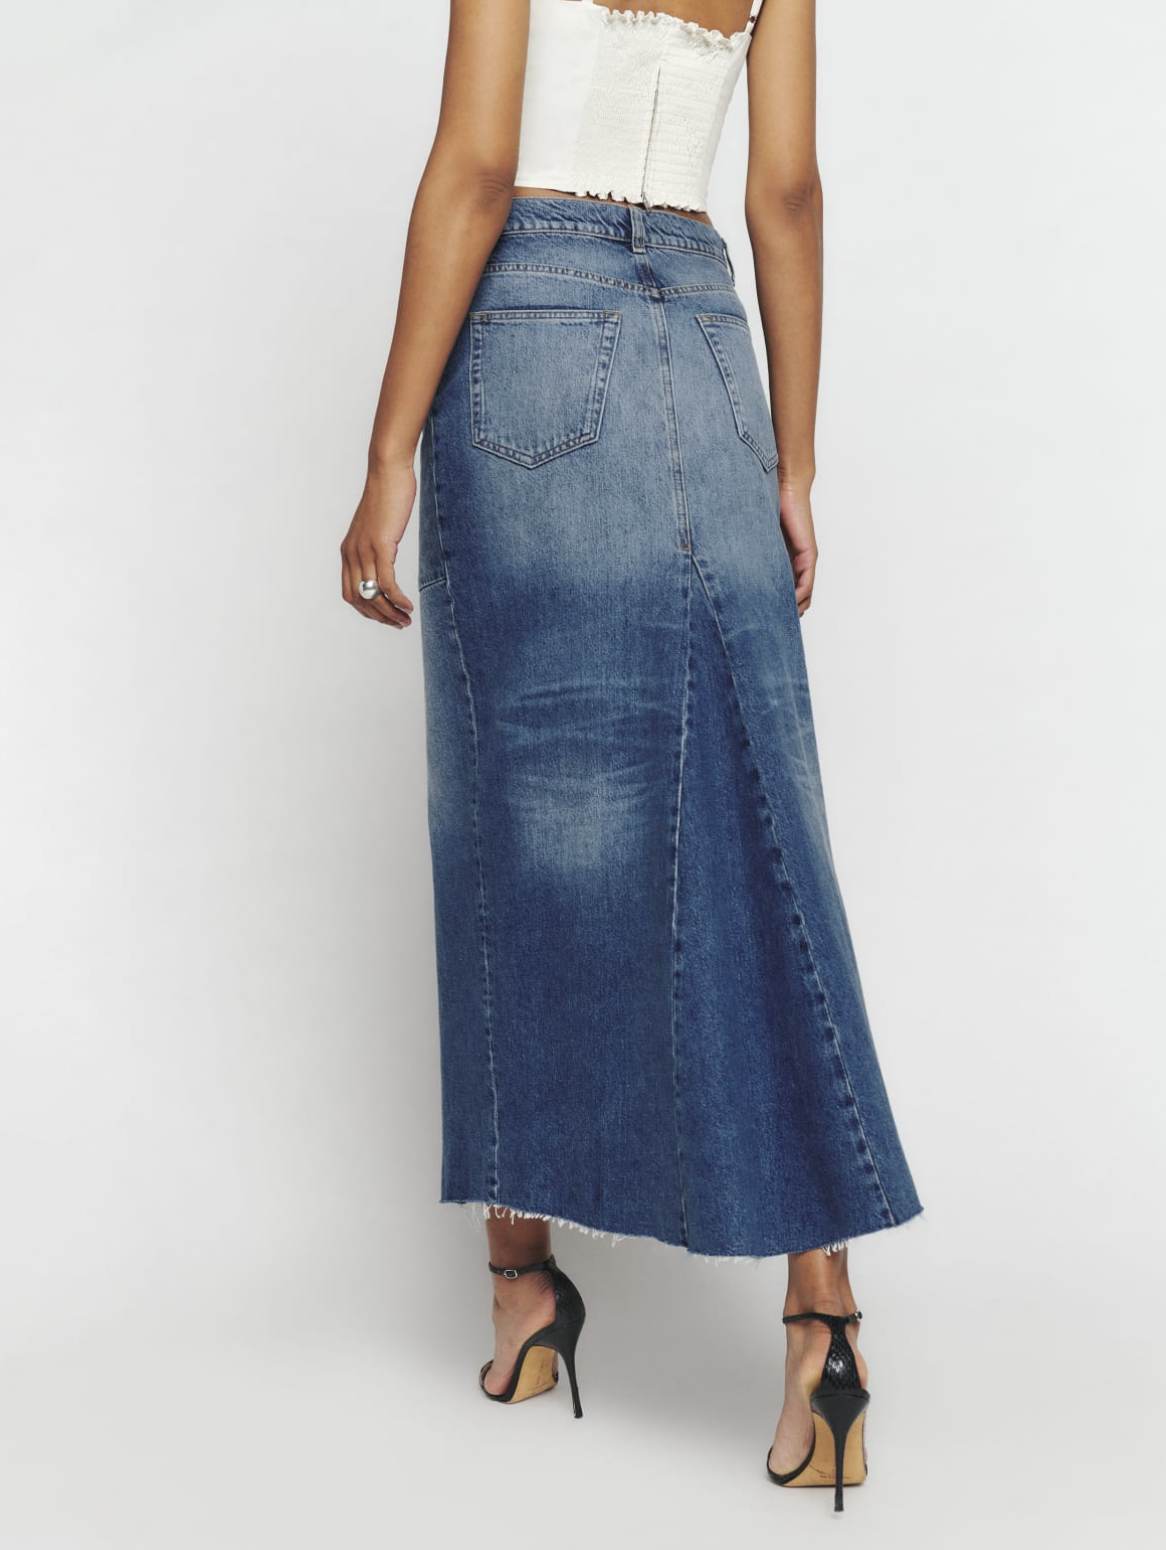 Get The Look - The Denim Midi Skirt - Inthefrow